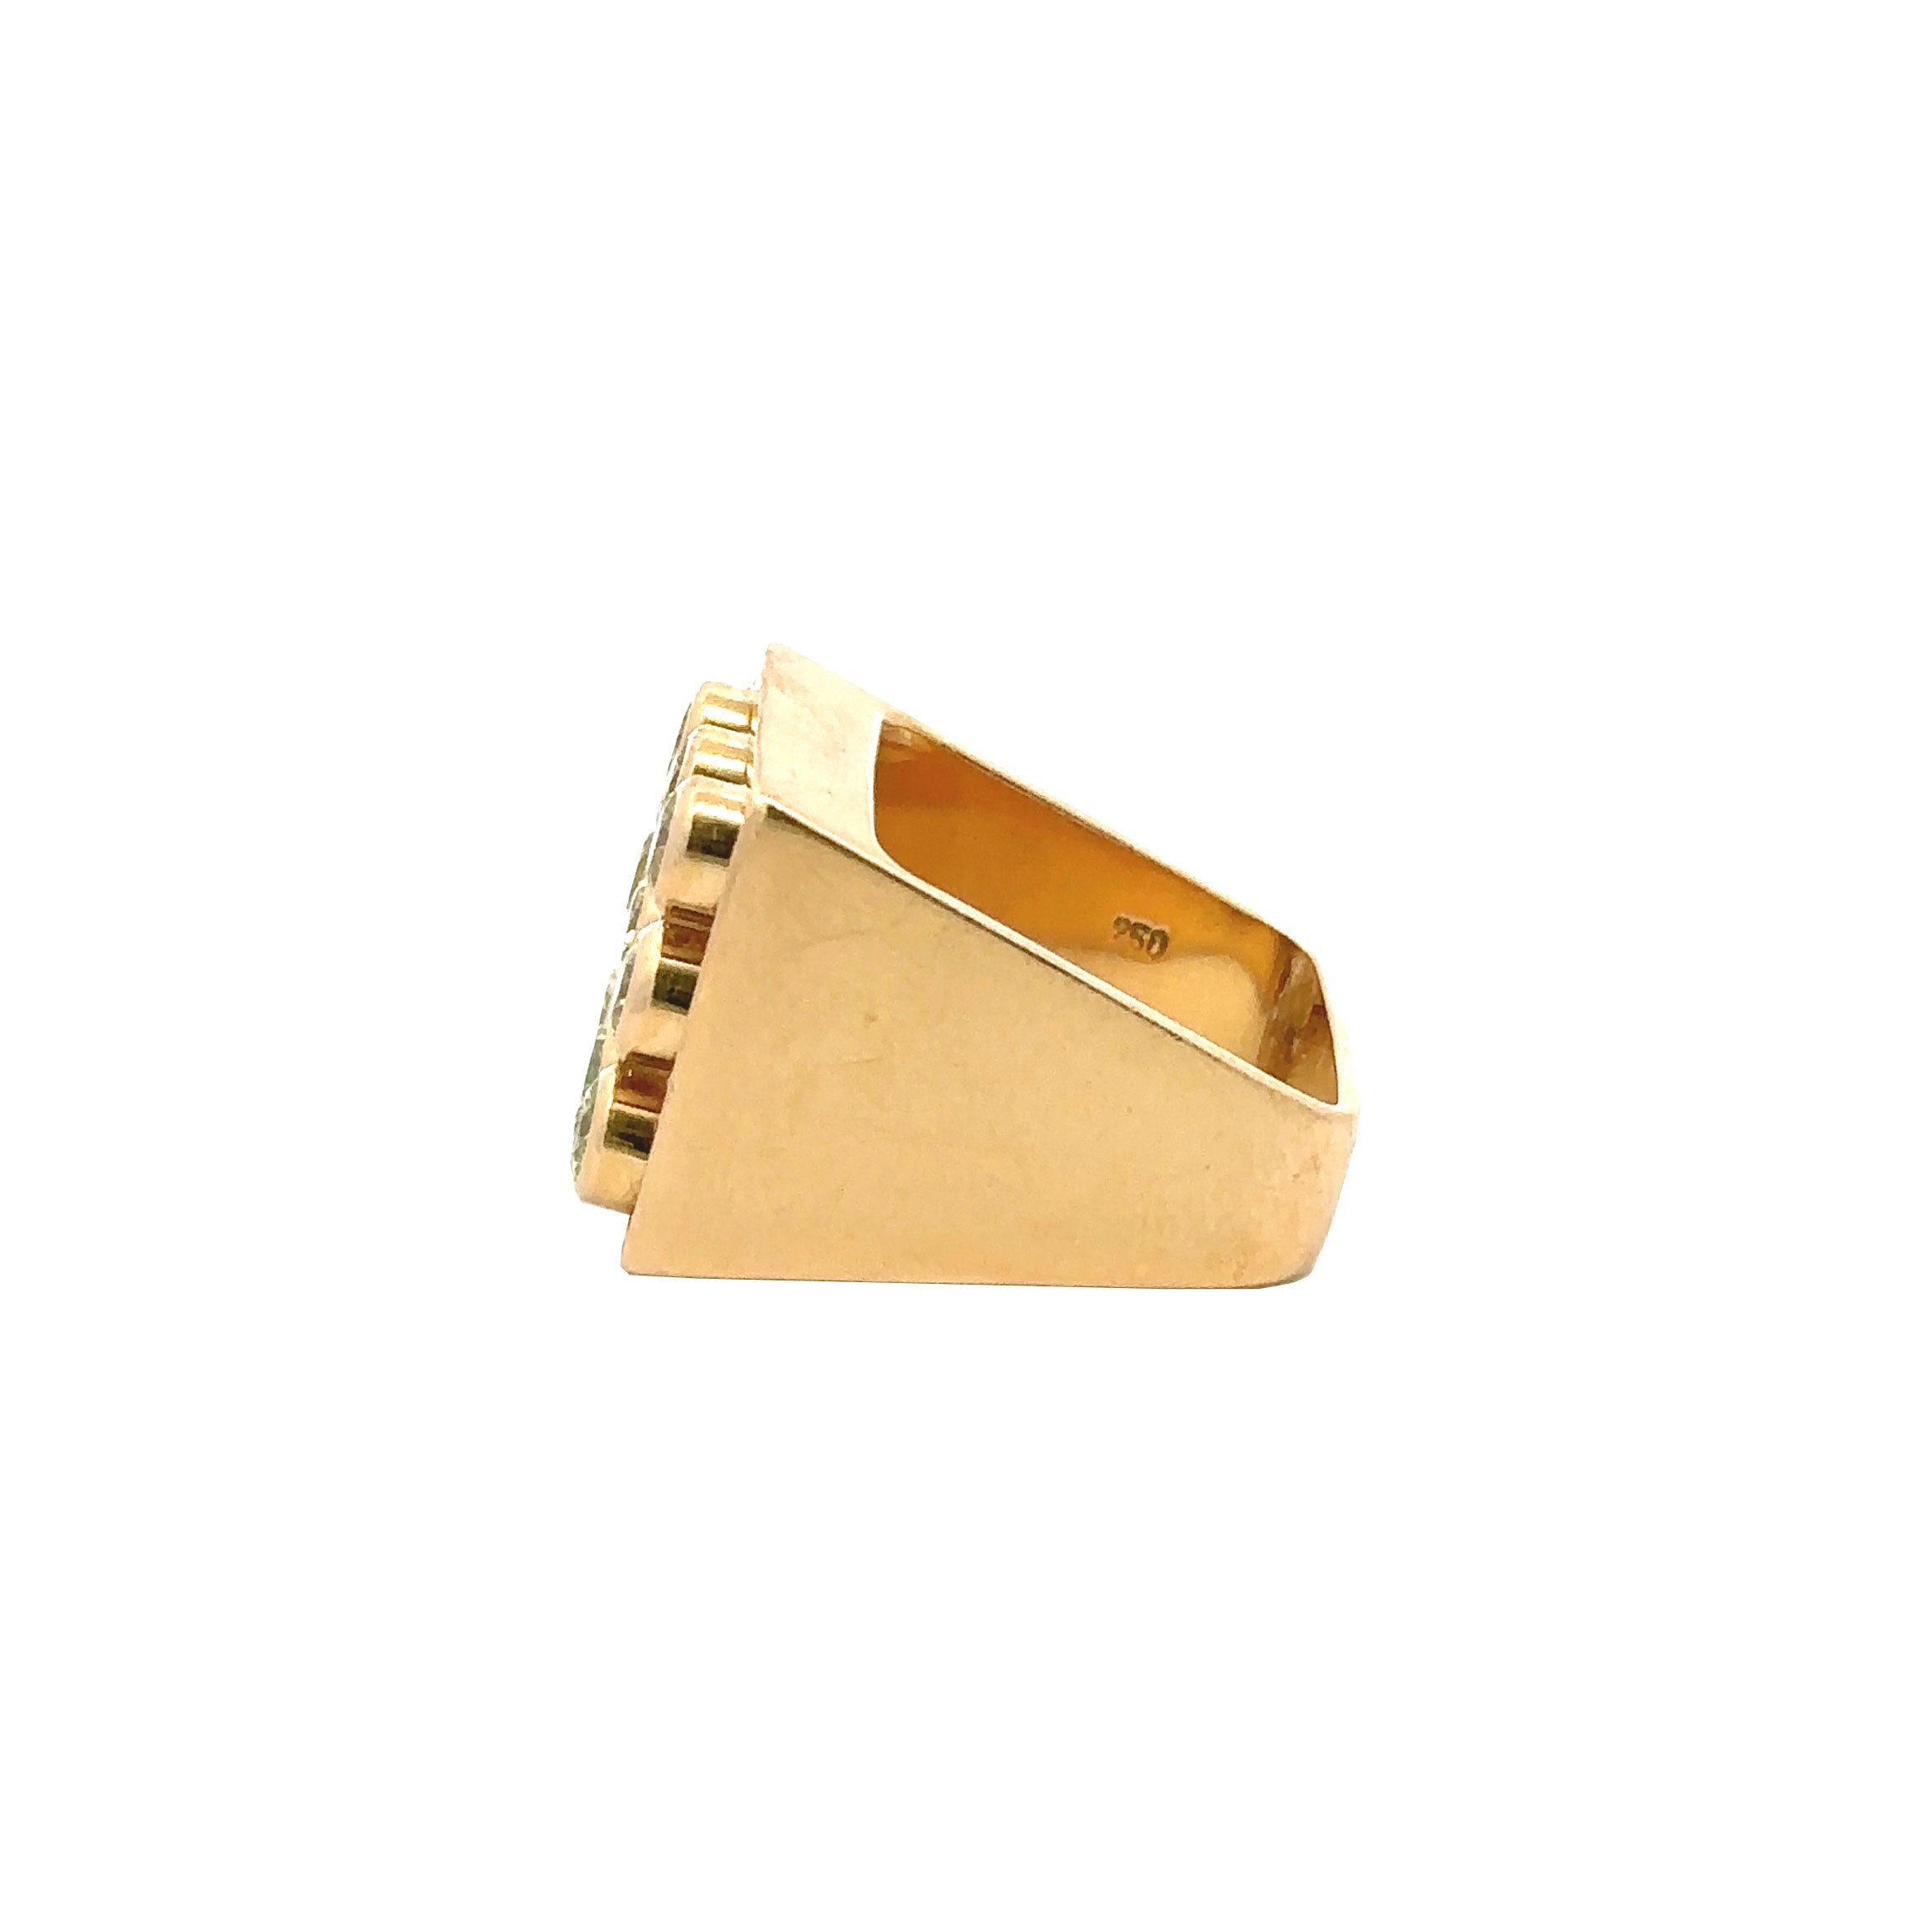 Vintage Yellow and White Diamond "Lego" Ring - Be On Park